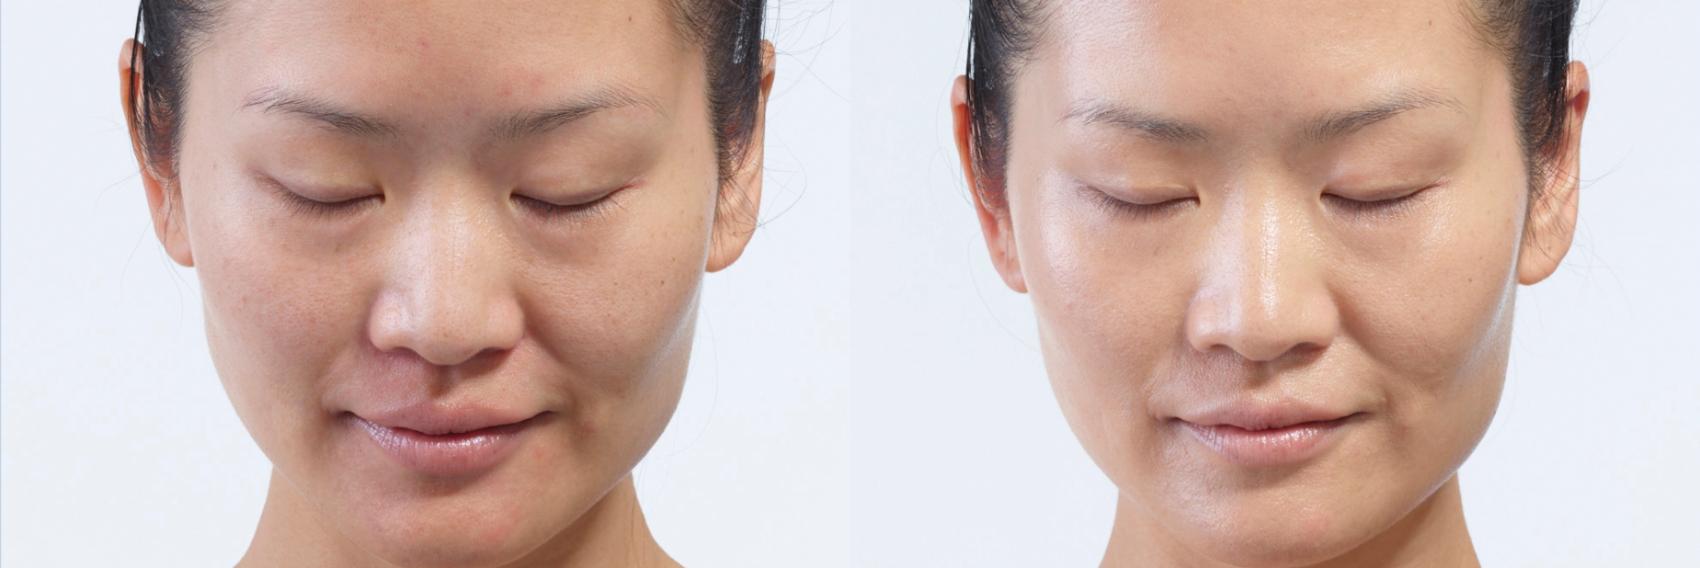 Before picture shows a woman's face with normal acne. After picture shows visibly brighter and glowing skin.